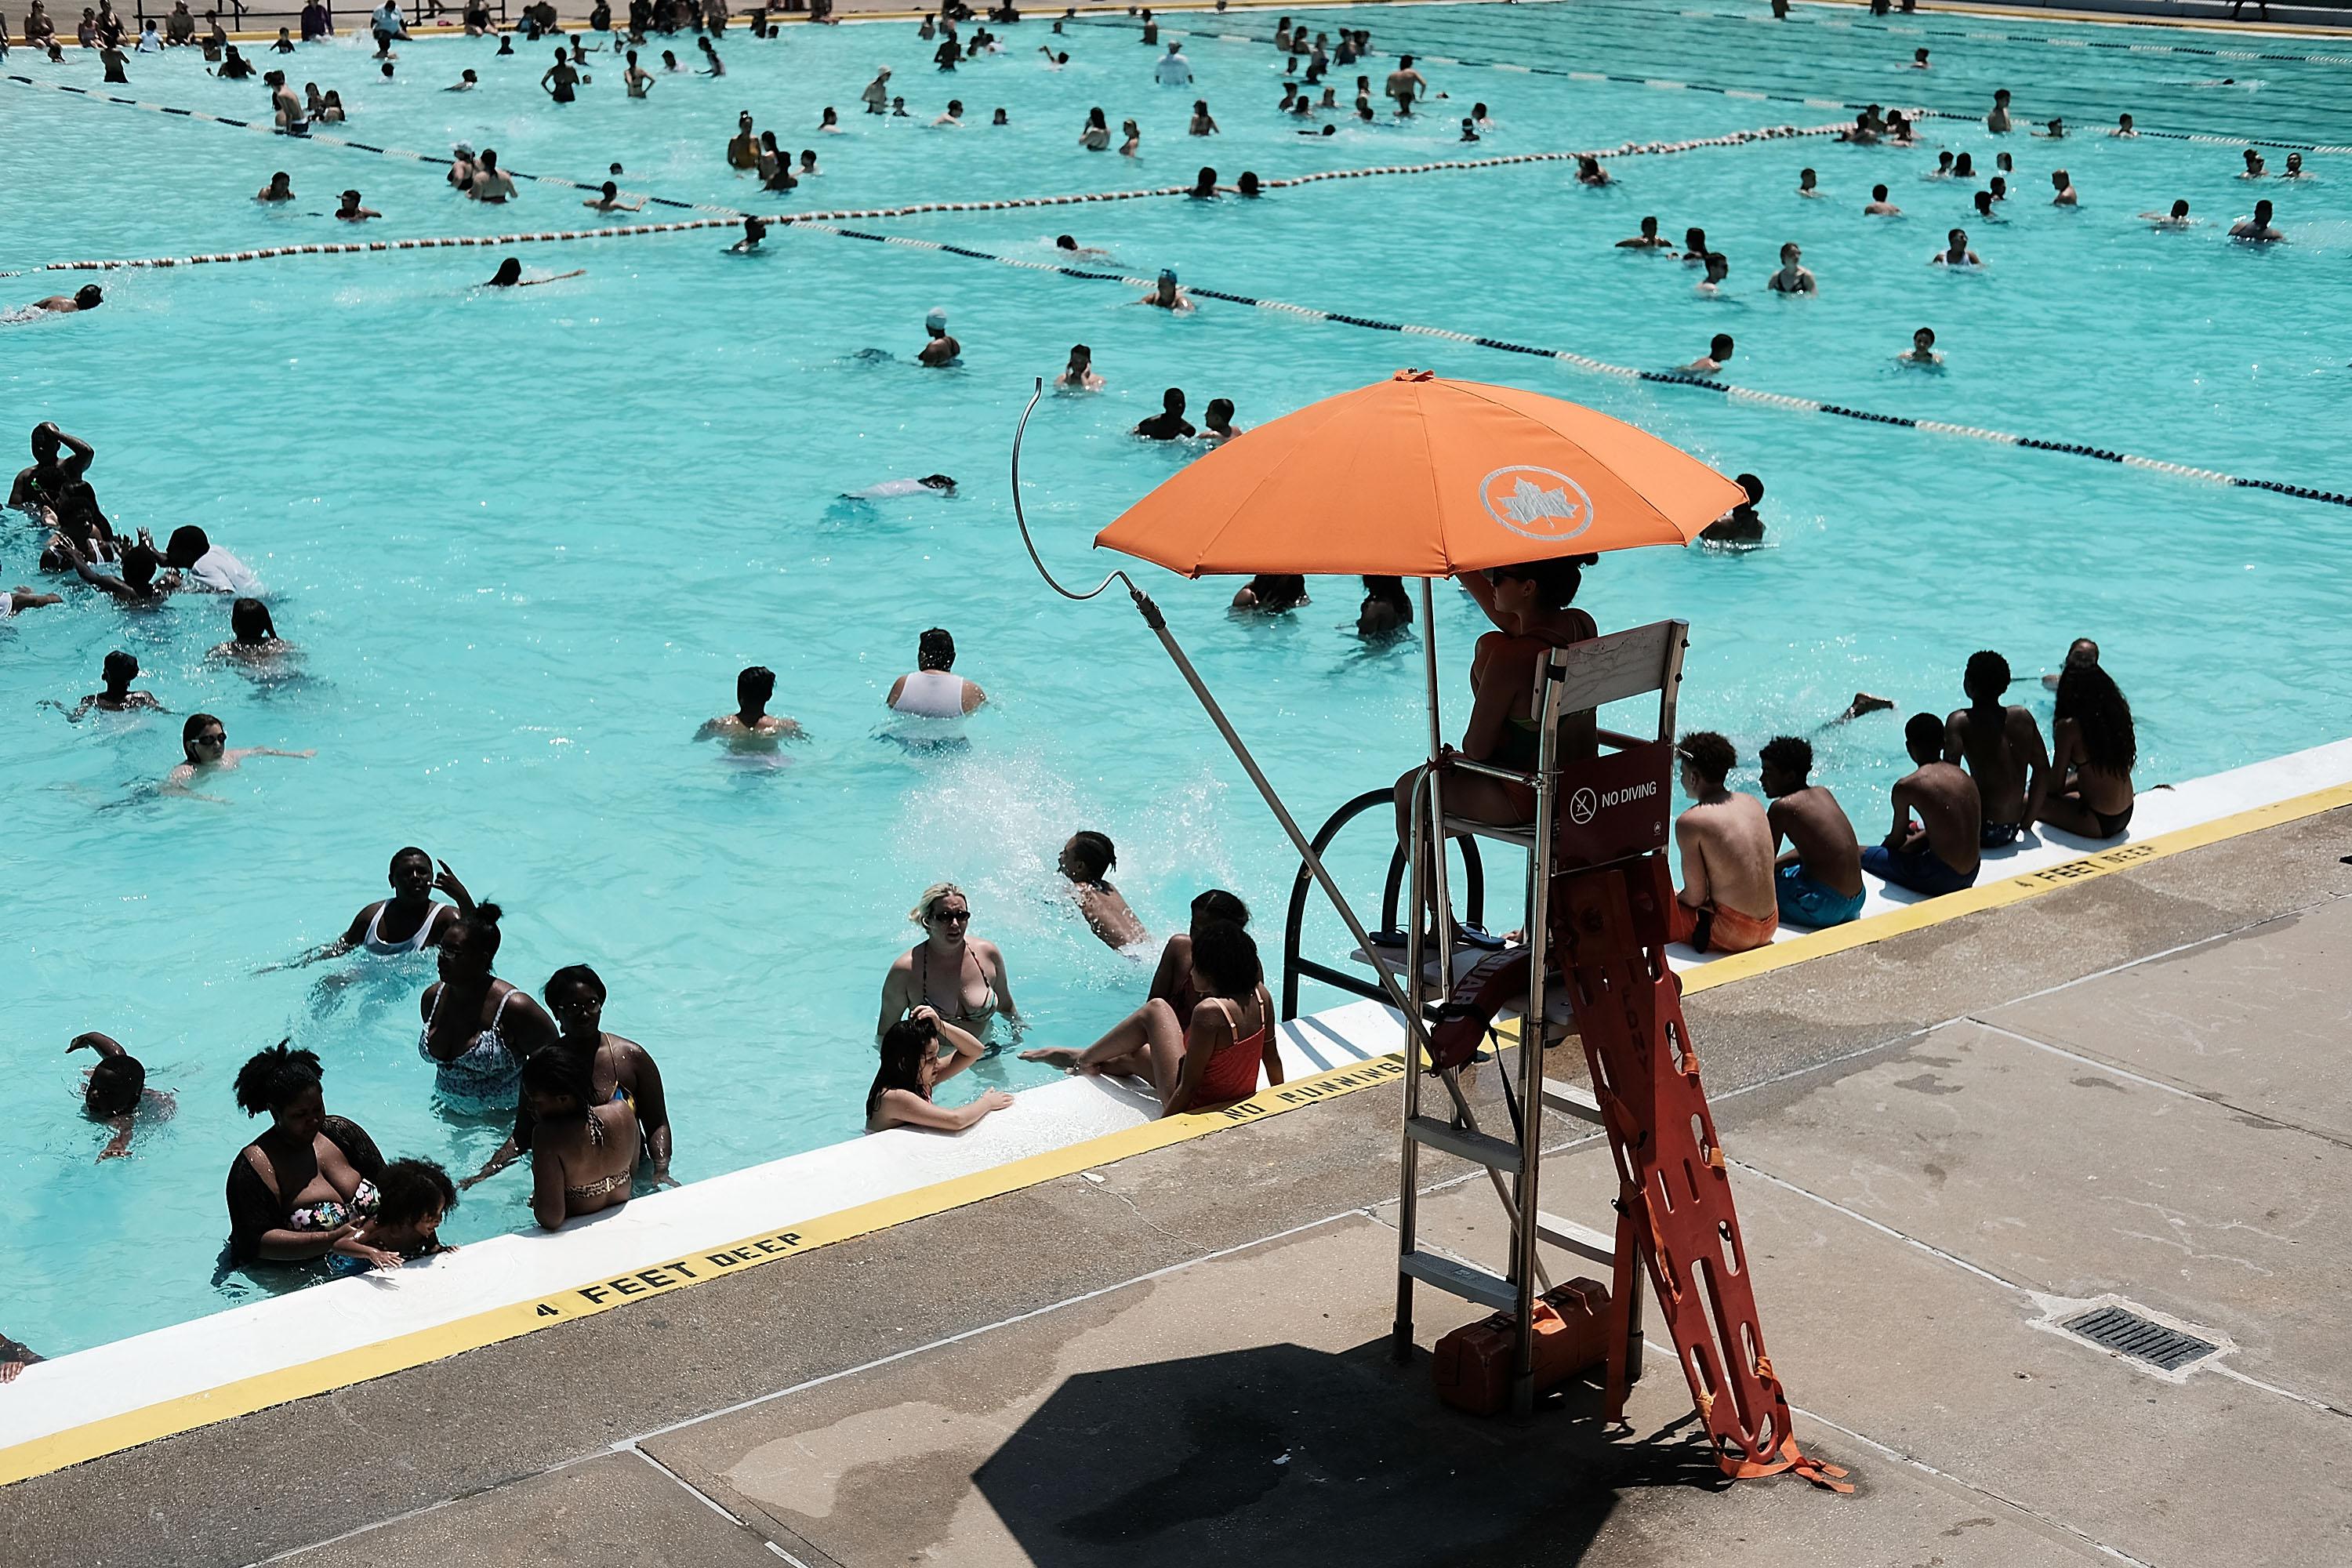 A swimming pool filled with people with a lifeguard looking on.